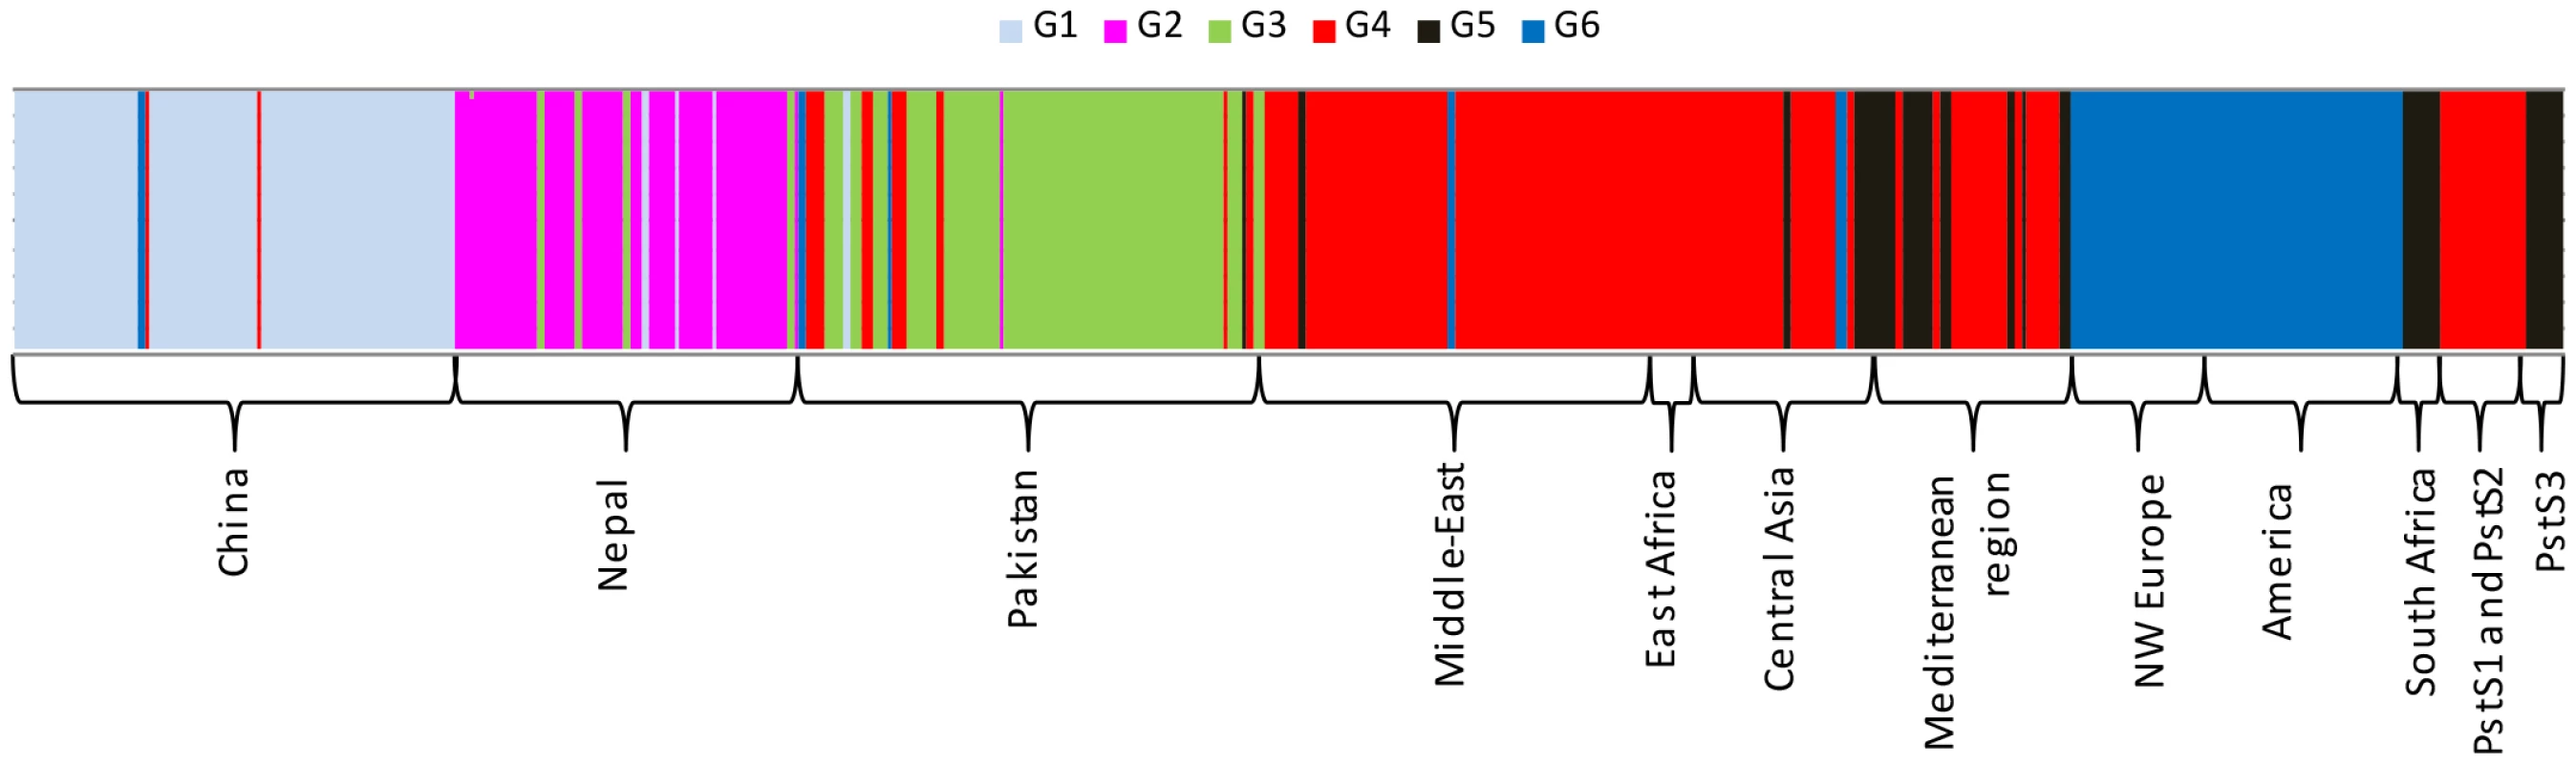 Clustering of 409 PST isolates representing worldwide geographical regions to genetic groups for the optimal K-value (K = 6) in the DAPC analysis.